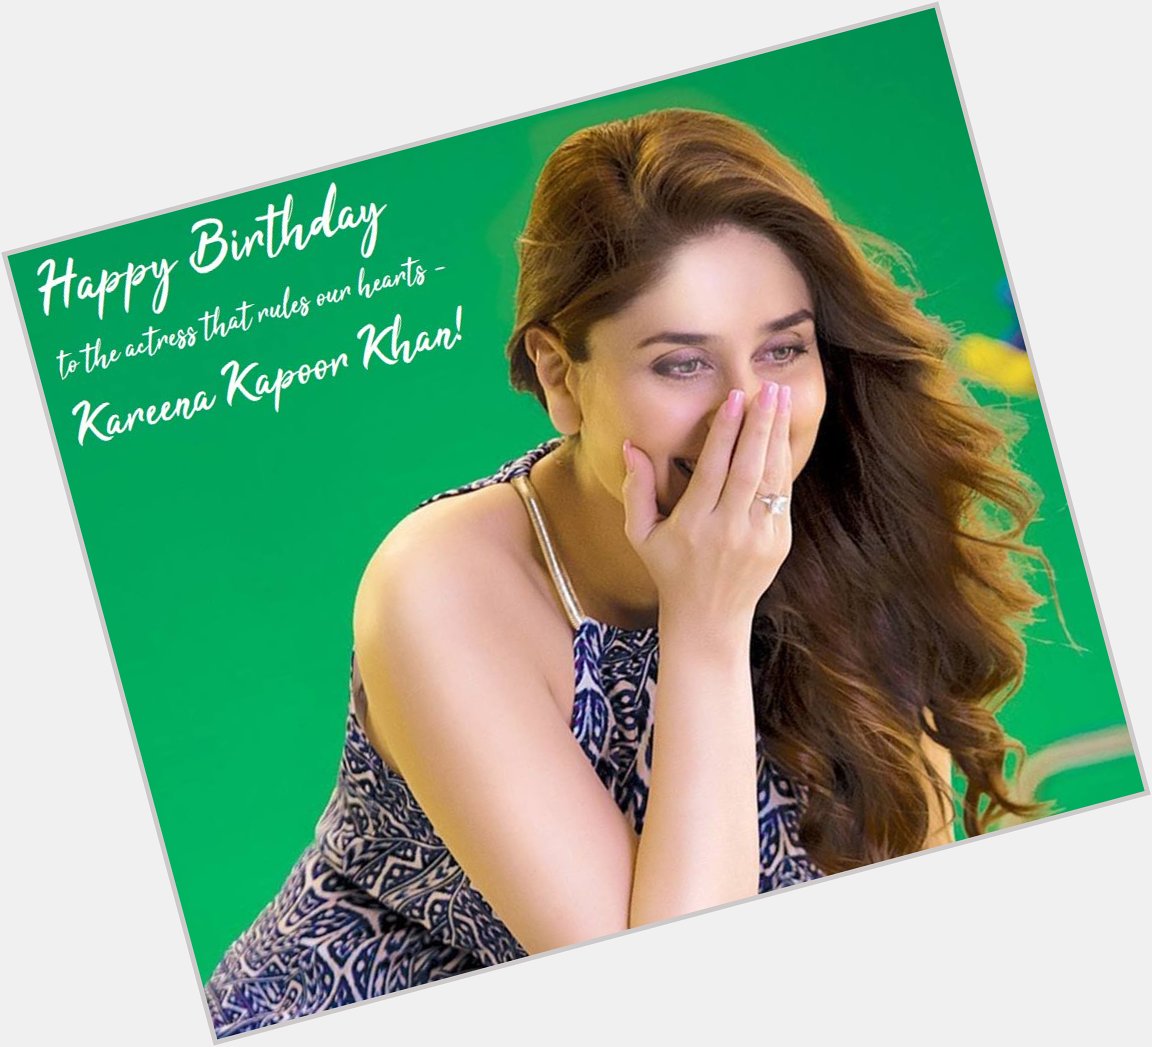 Happy Birthday to the actress that rules our hearts - Kareena Kapoor Khan! 